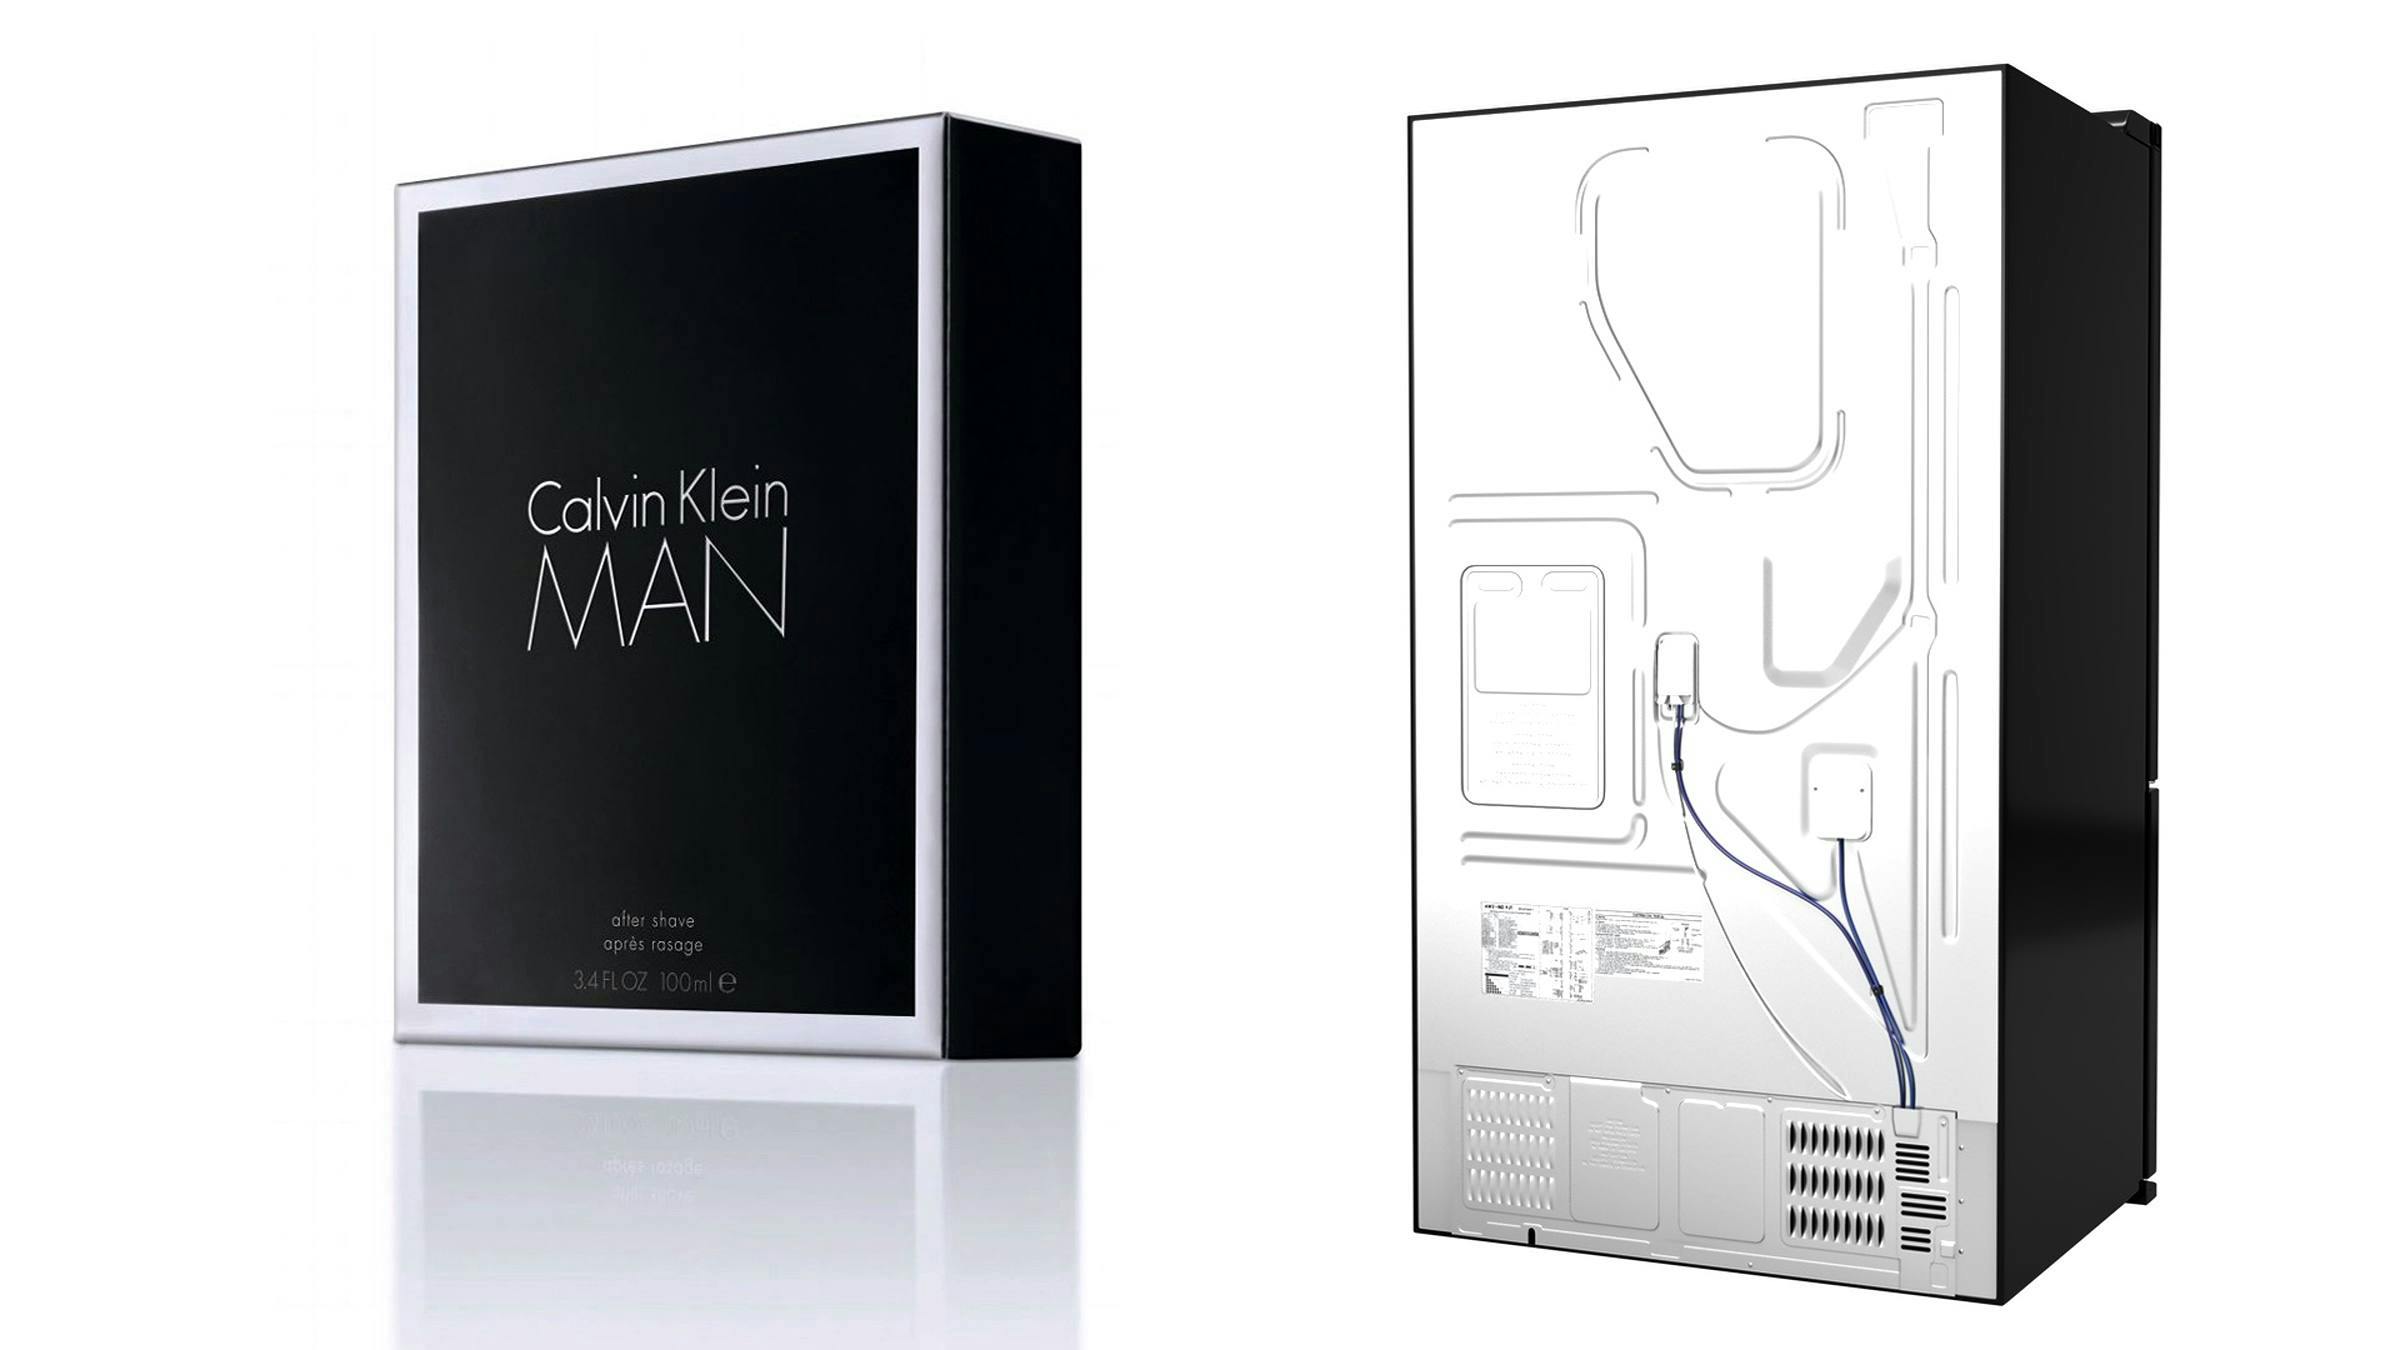 a digitally rendered image of a box of Calvin Klein Man perfume and the back of a fridge. Both a free standing in a white space